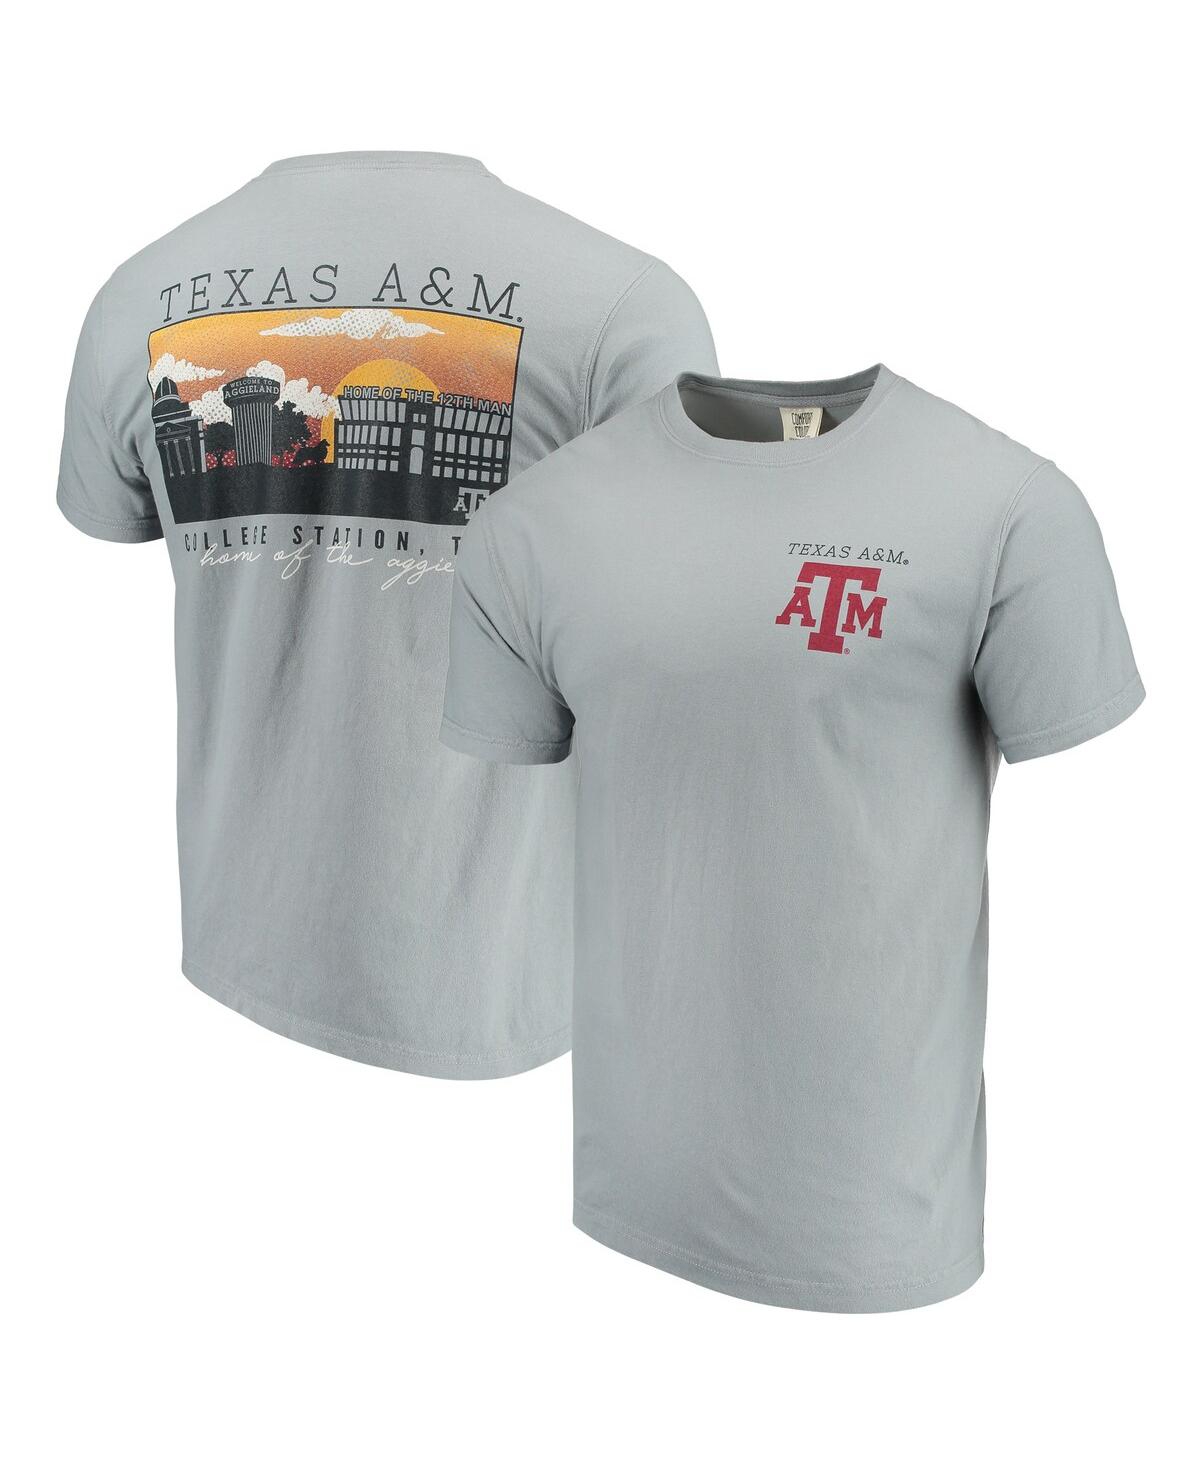 Shop Image One Men's Gray Texas A&m Aggies Comfort Colors Campus Scenery T-shirt